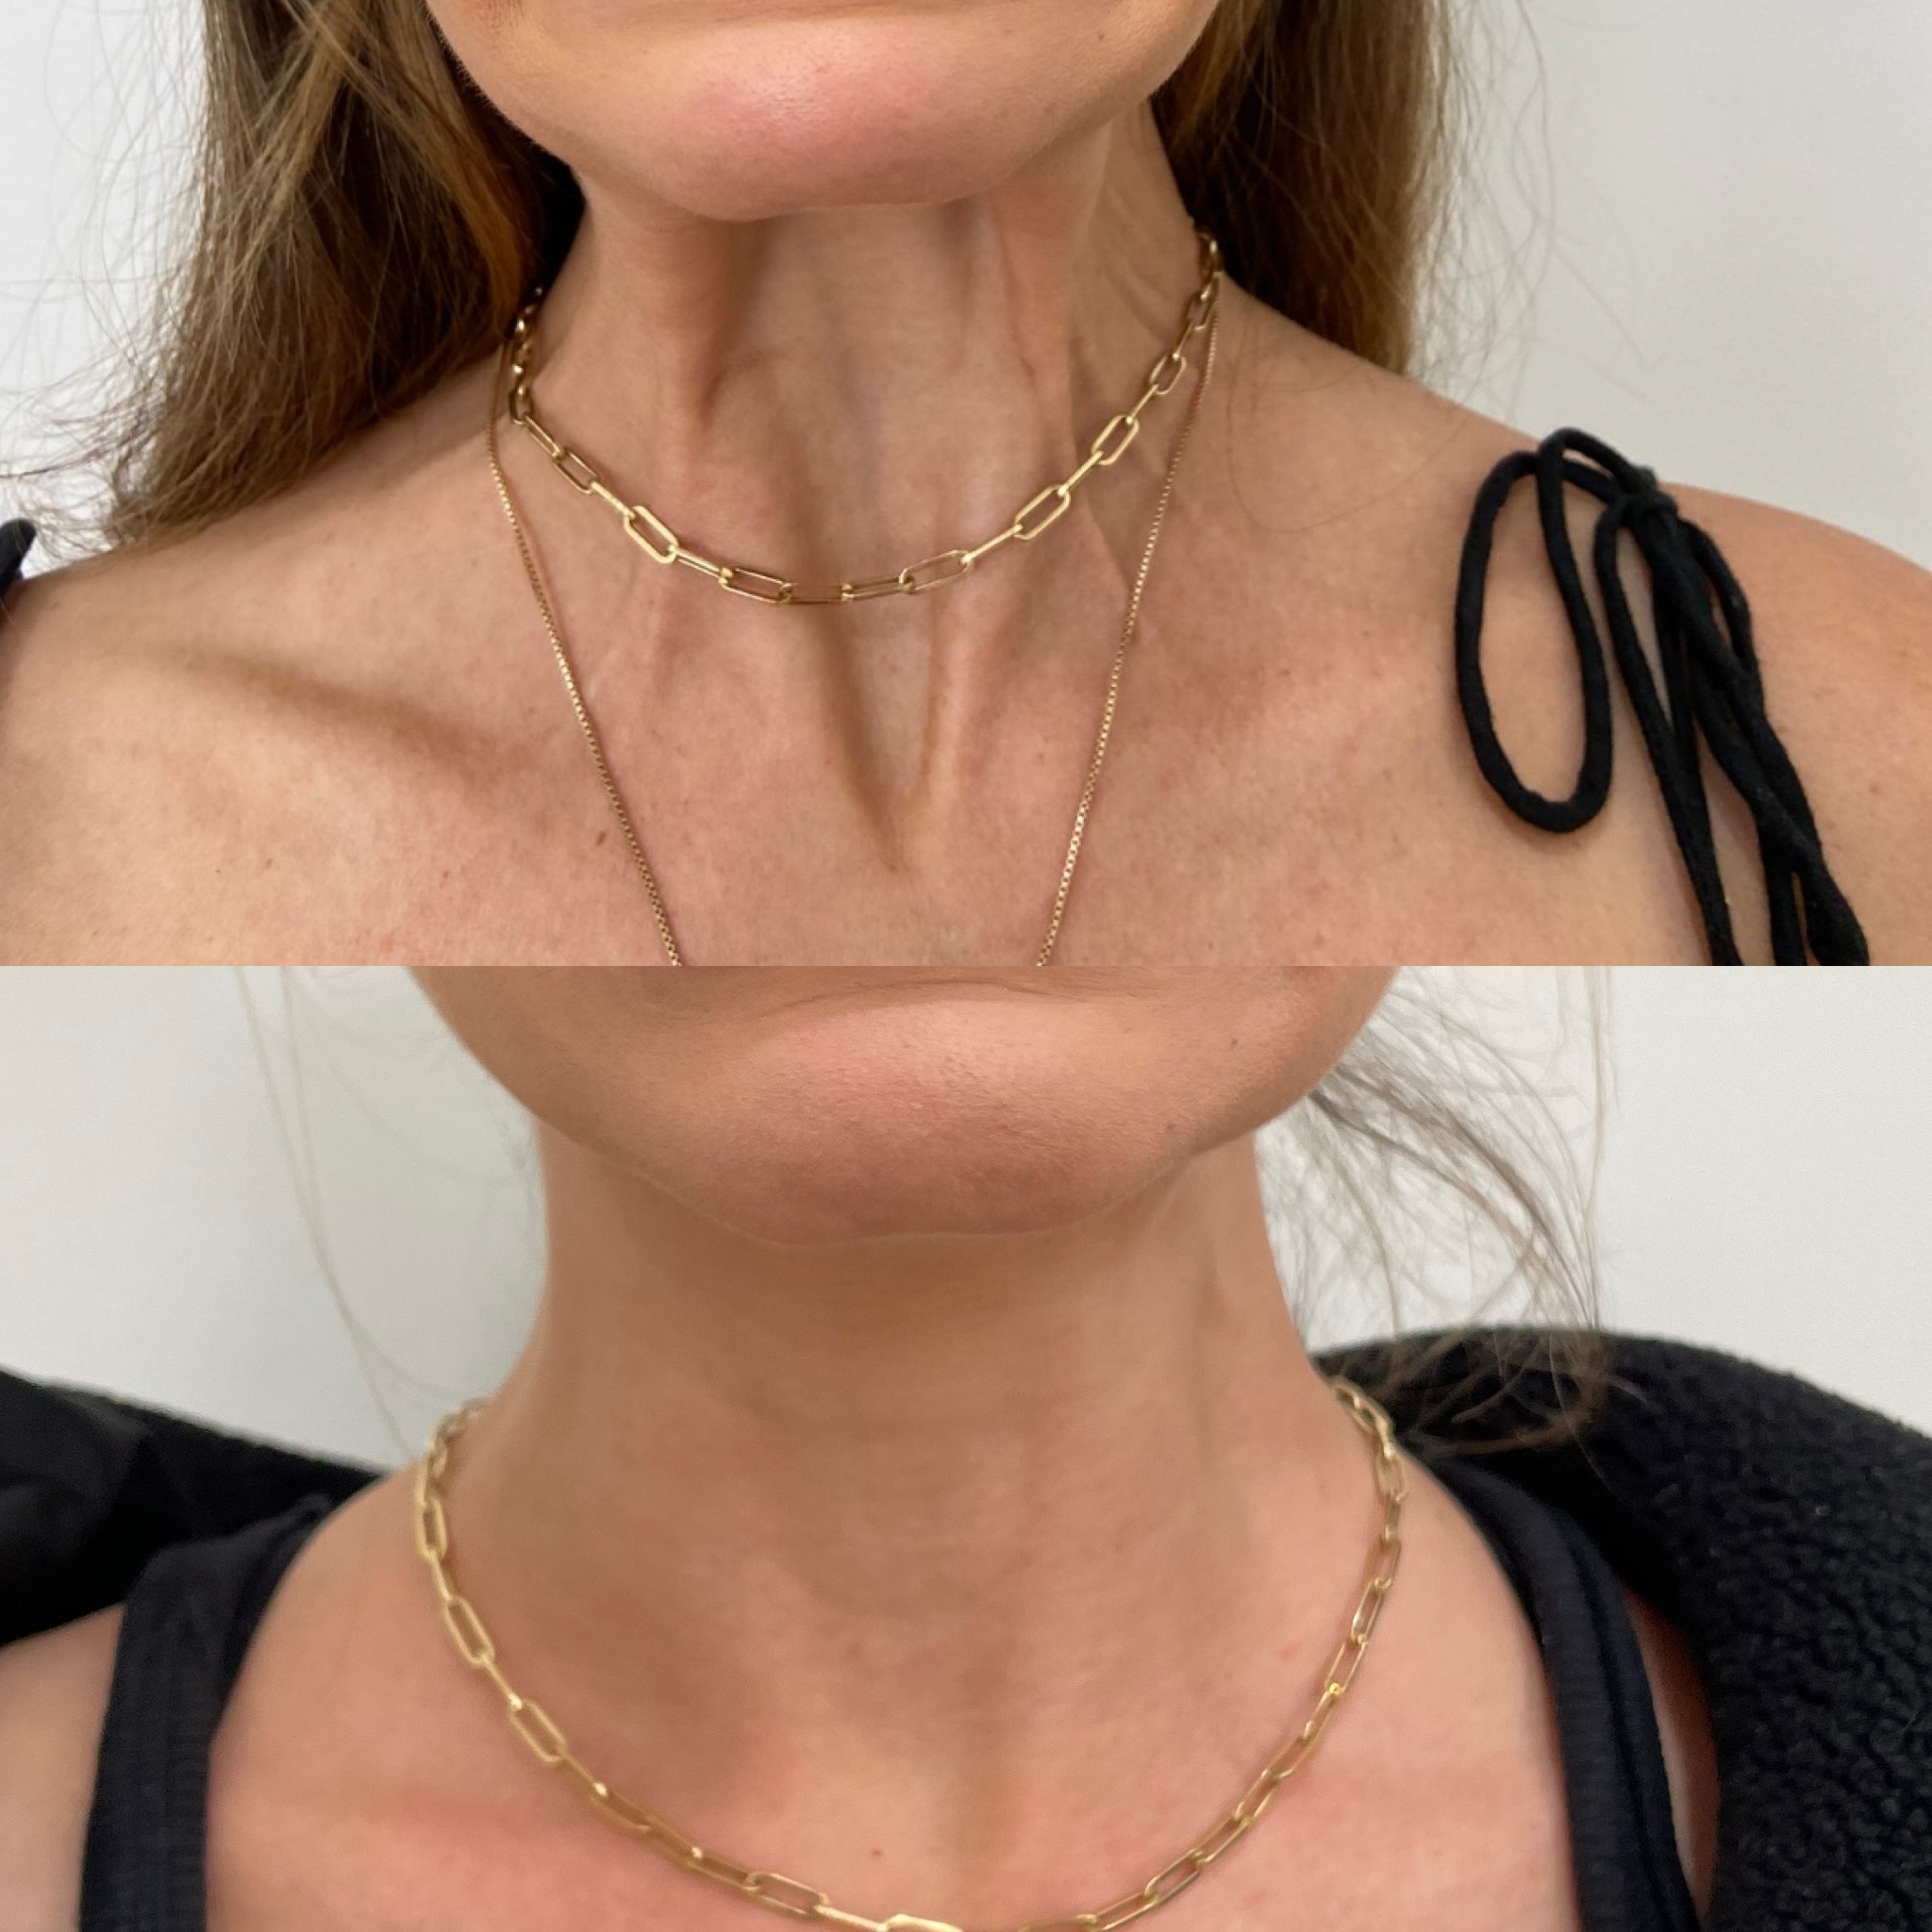 Before and After Botox Treatment on Neck | Beauty Boost Med Spa in Newport Beach, CA